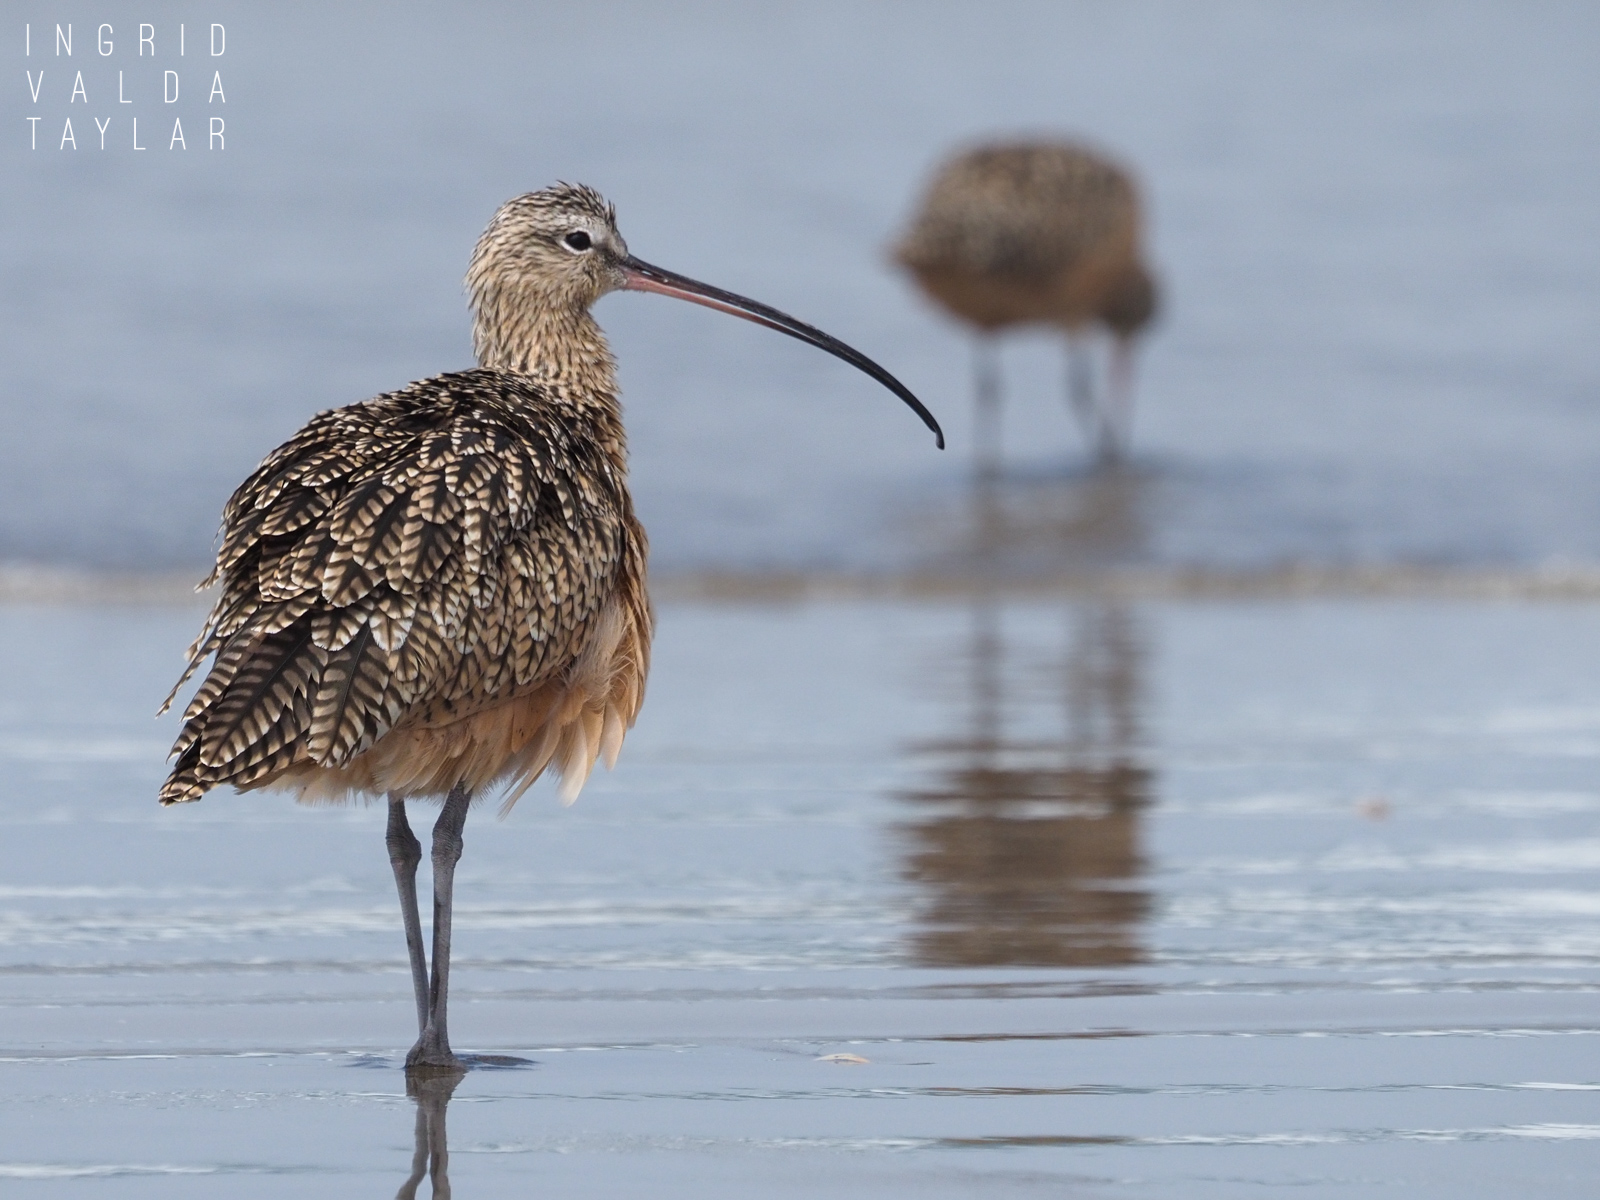 Long-billed Curlew on Morro Strand